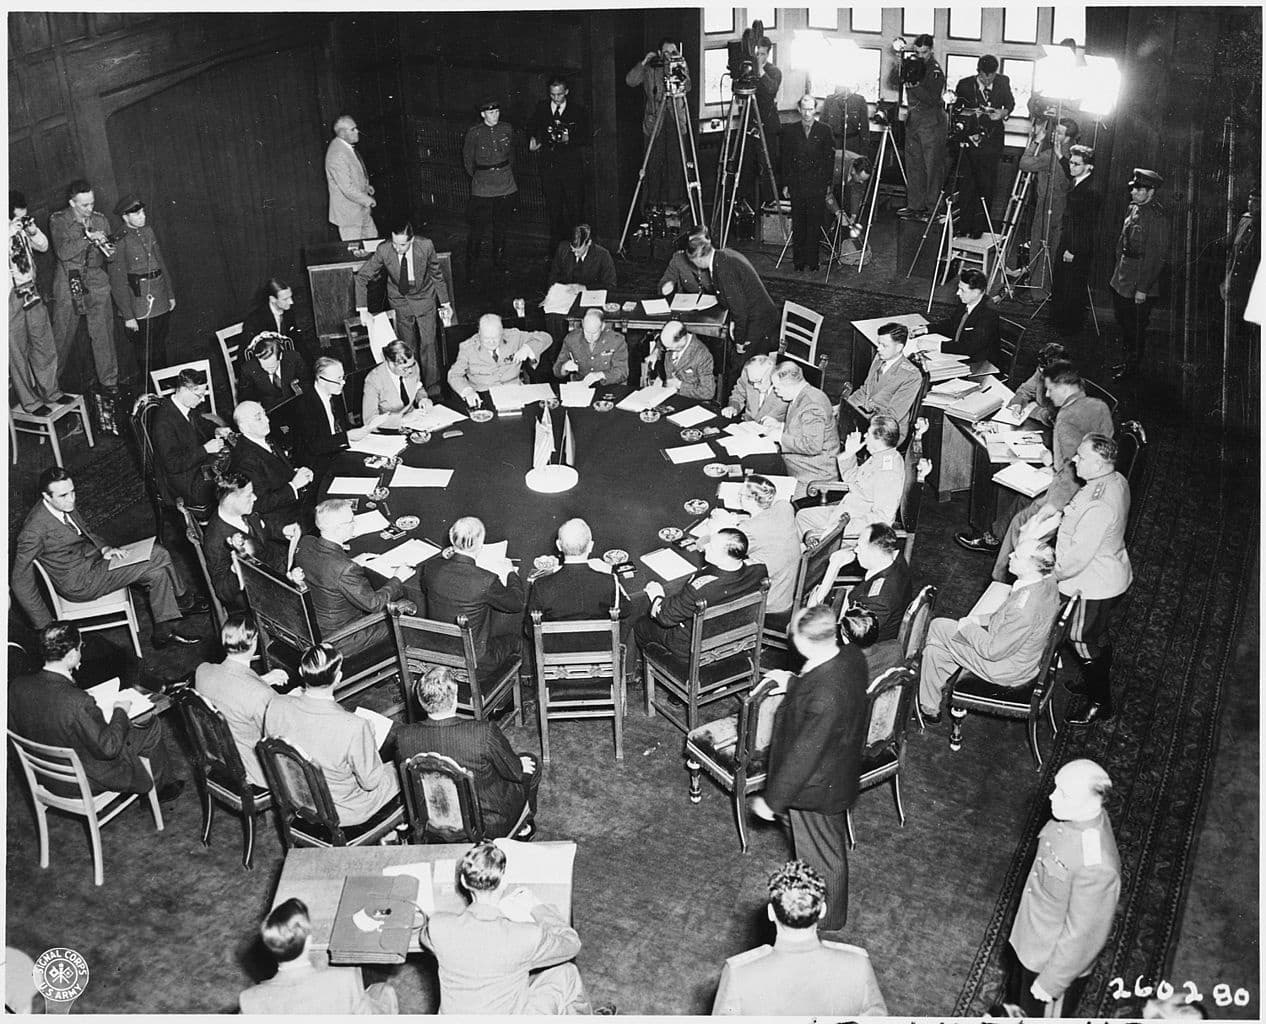 The Potsdam Conference - July 18th 1945 - The second plenary session of the Potsdam Conference begins on July 18th 1945